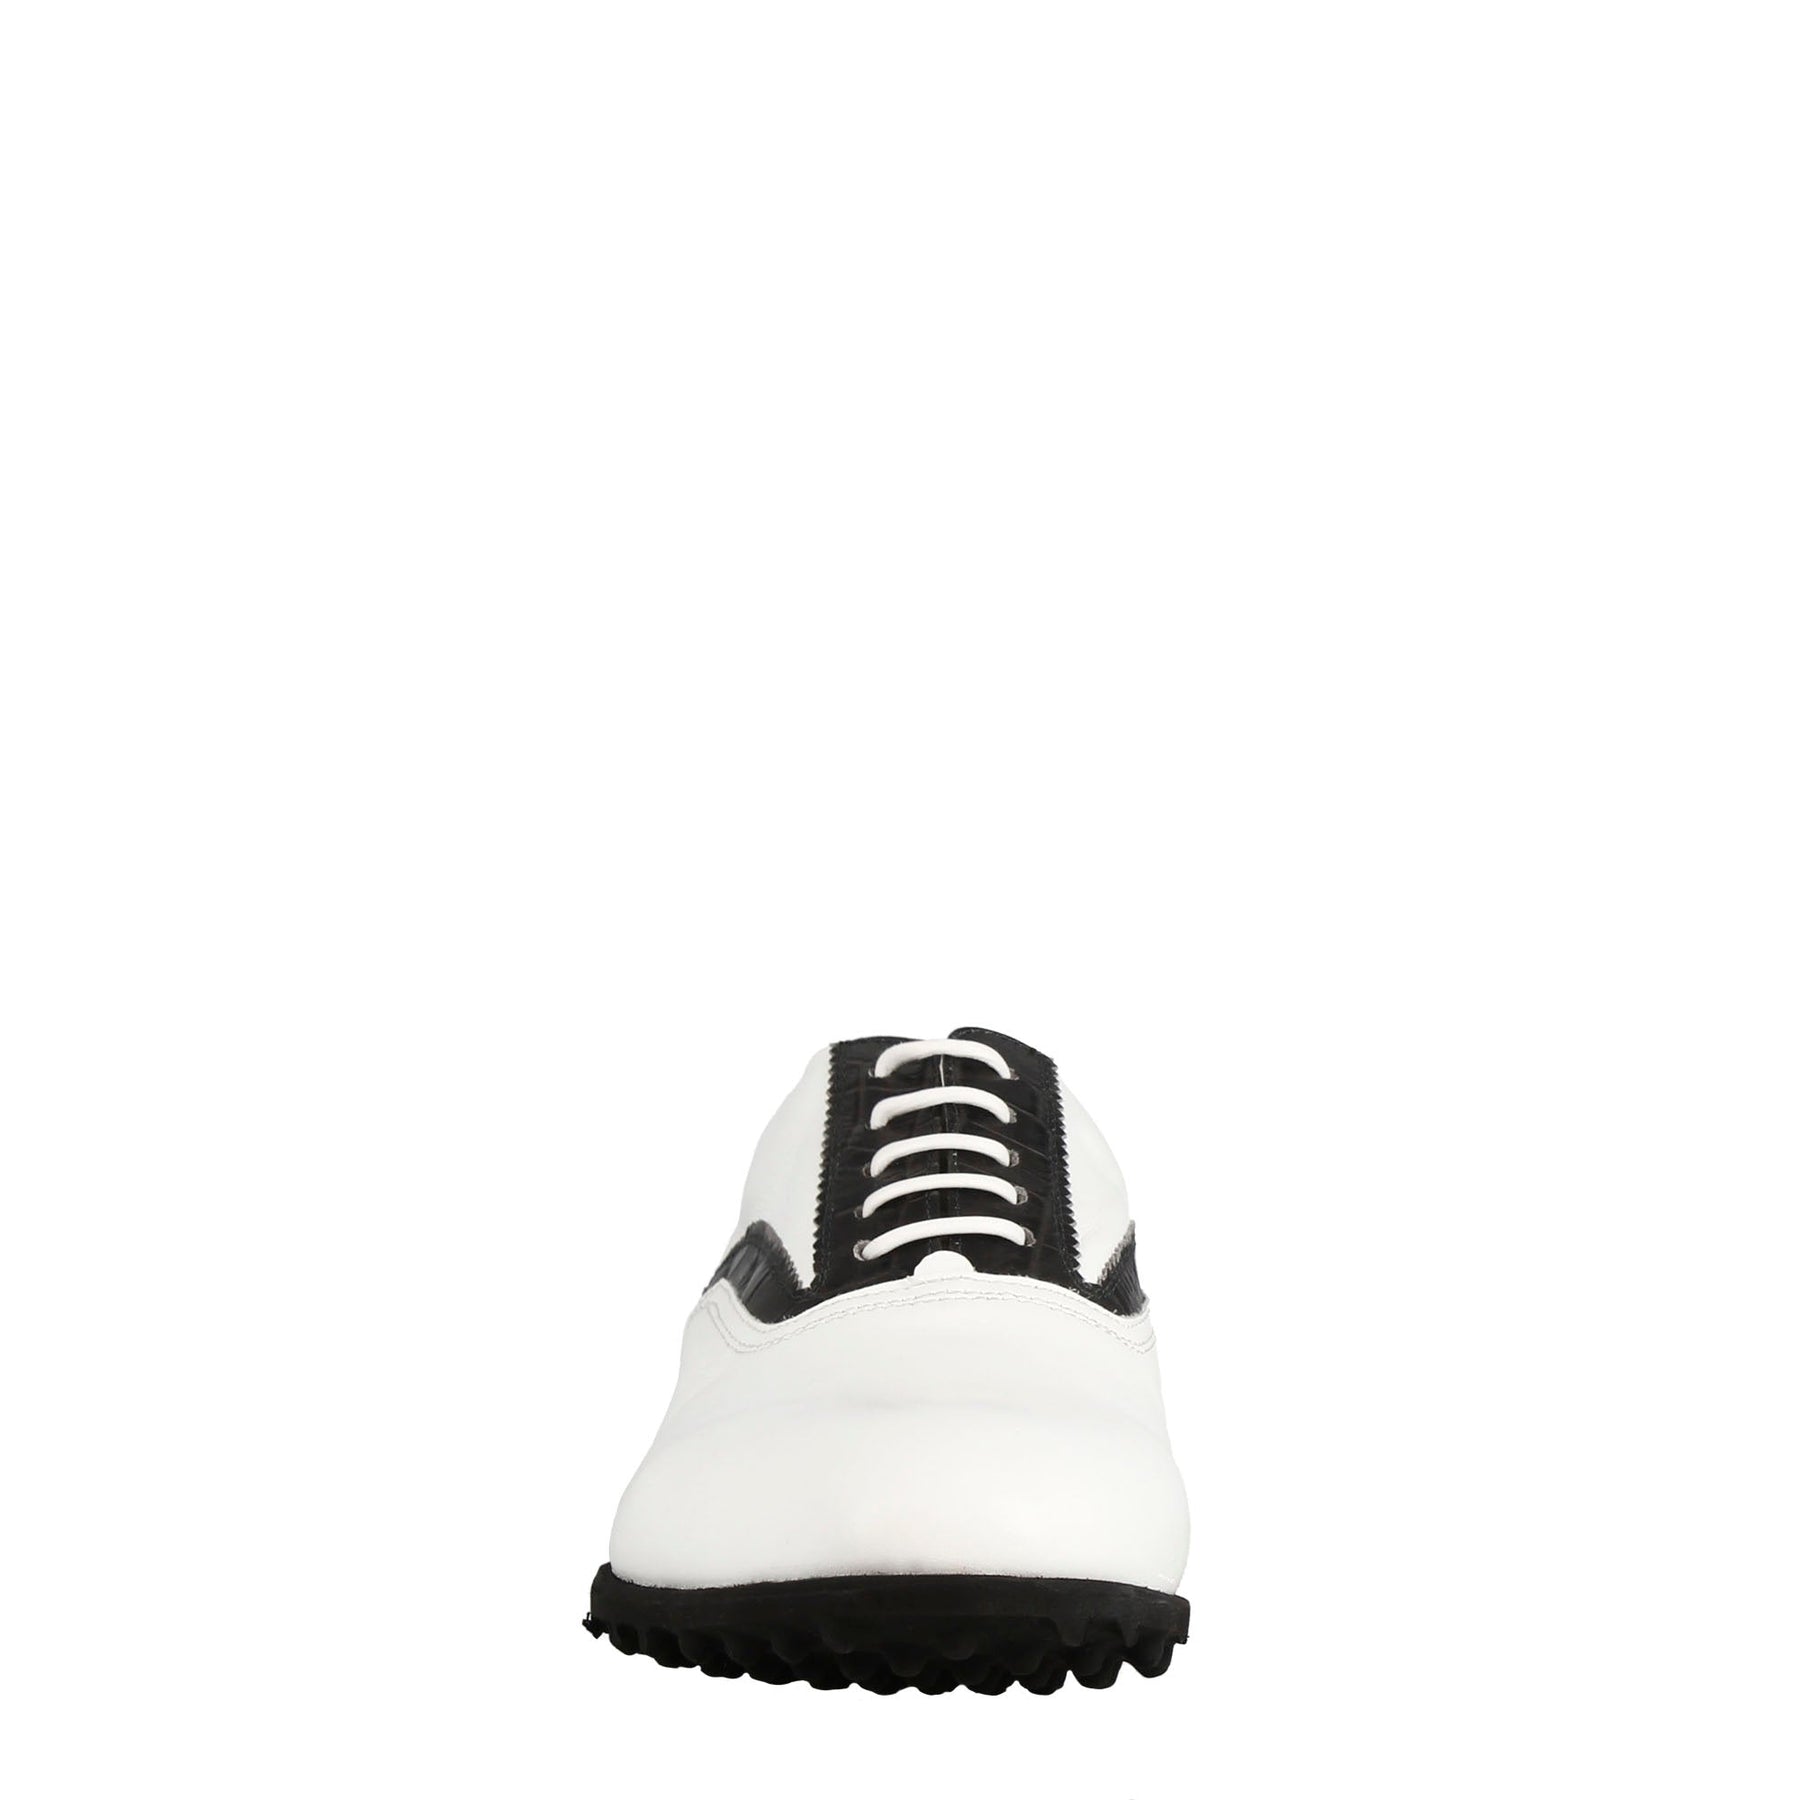 Handmade men's golf shoe in white leather with black details